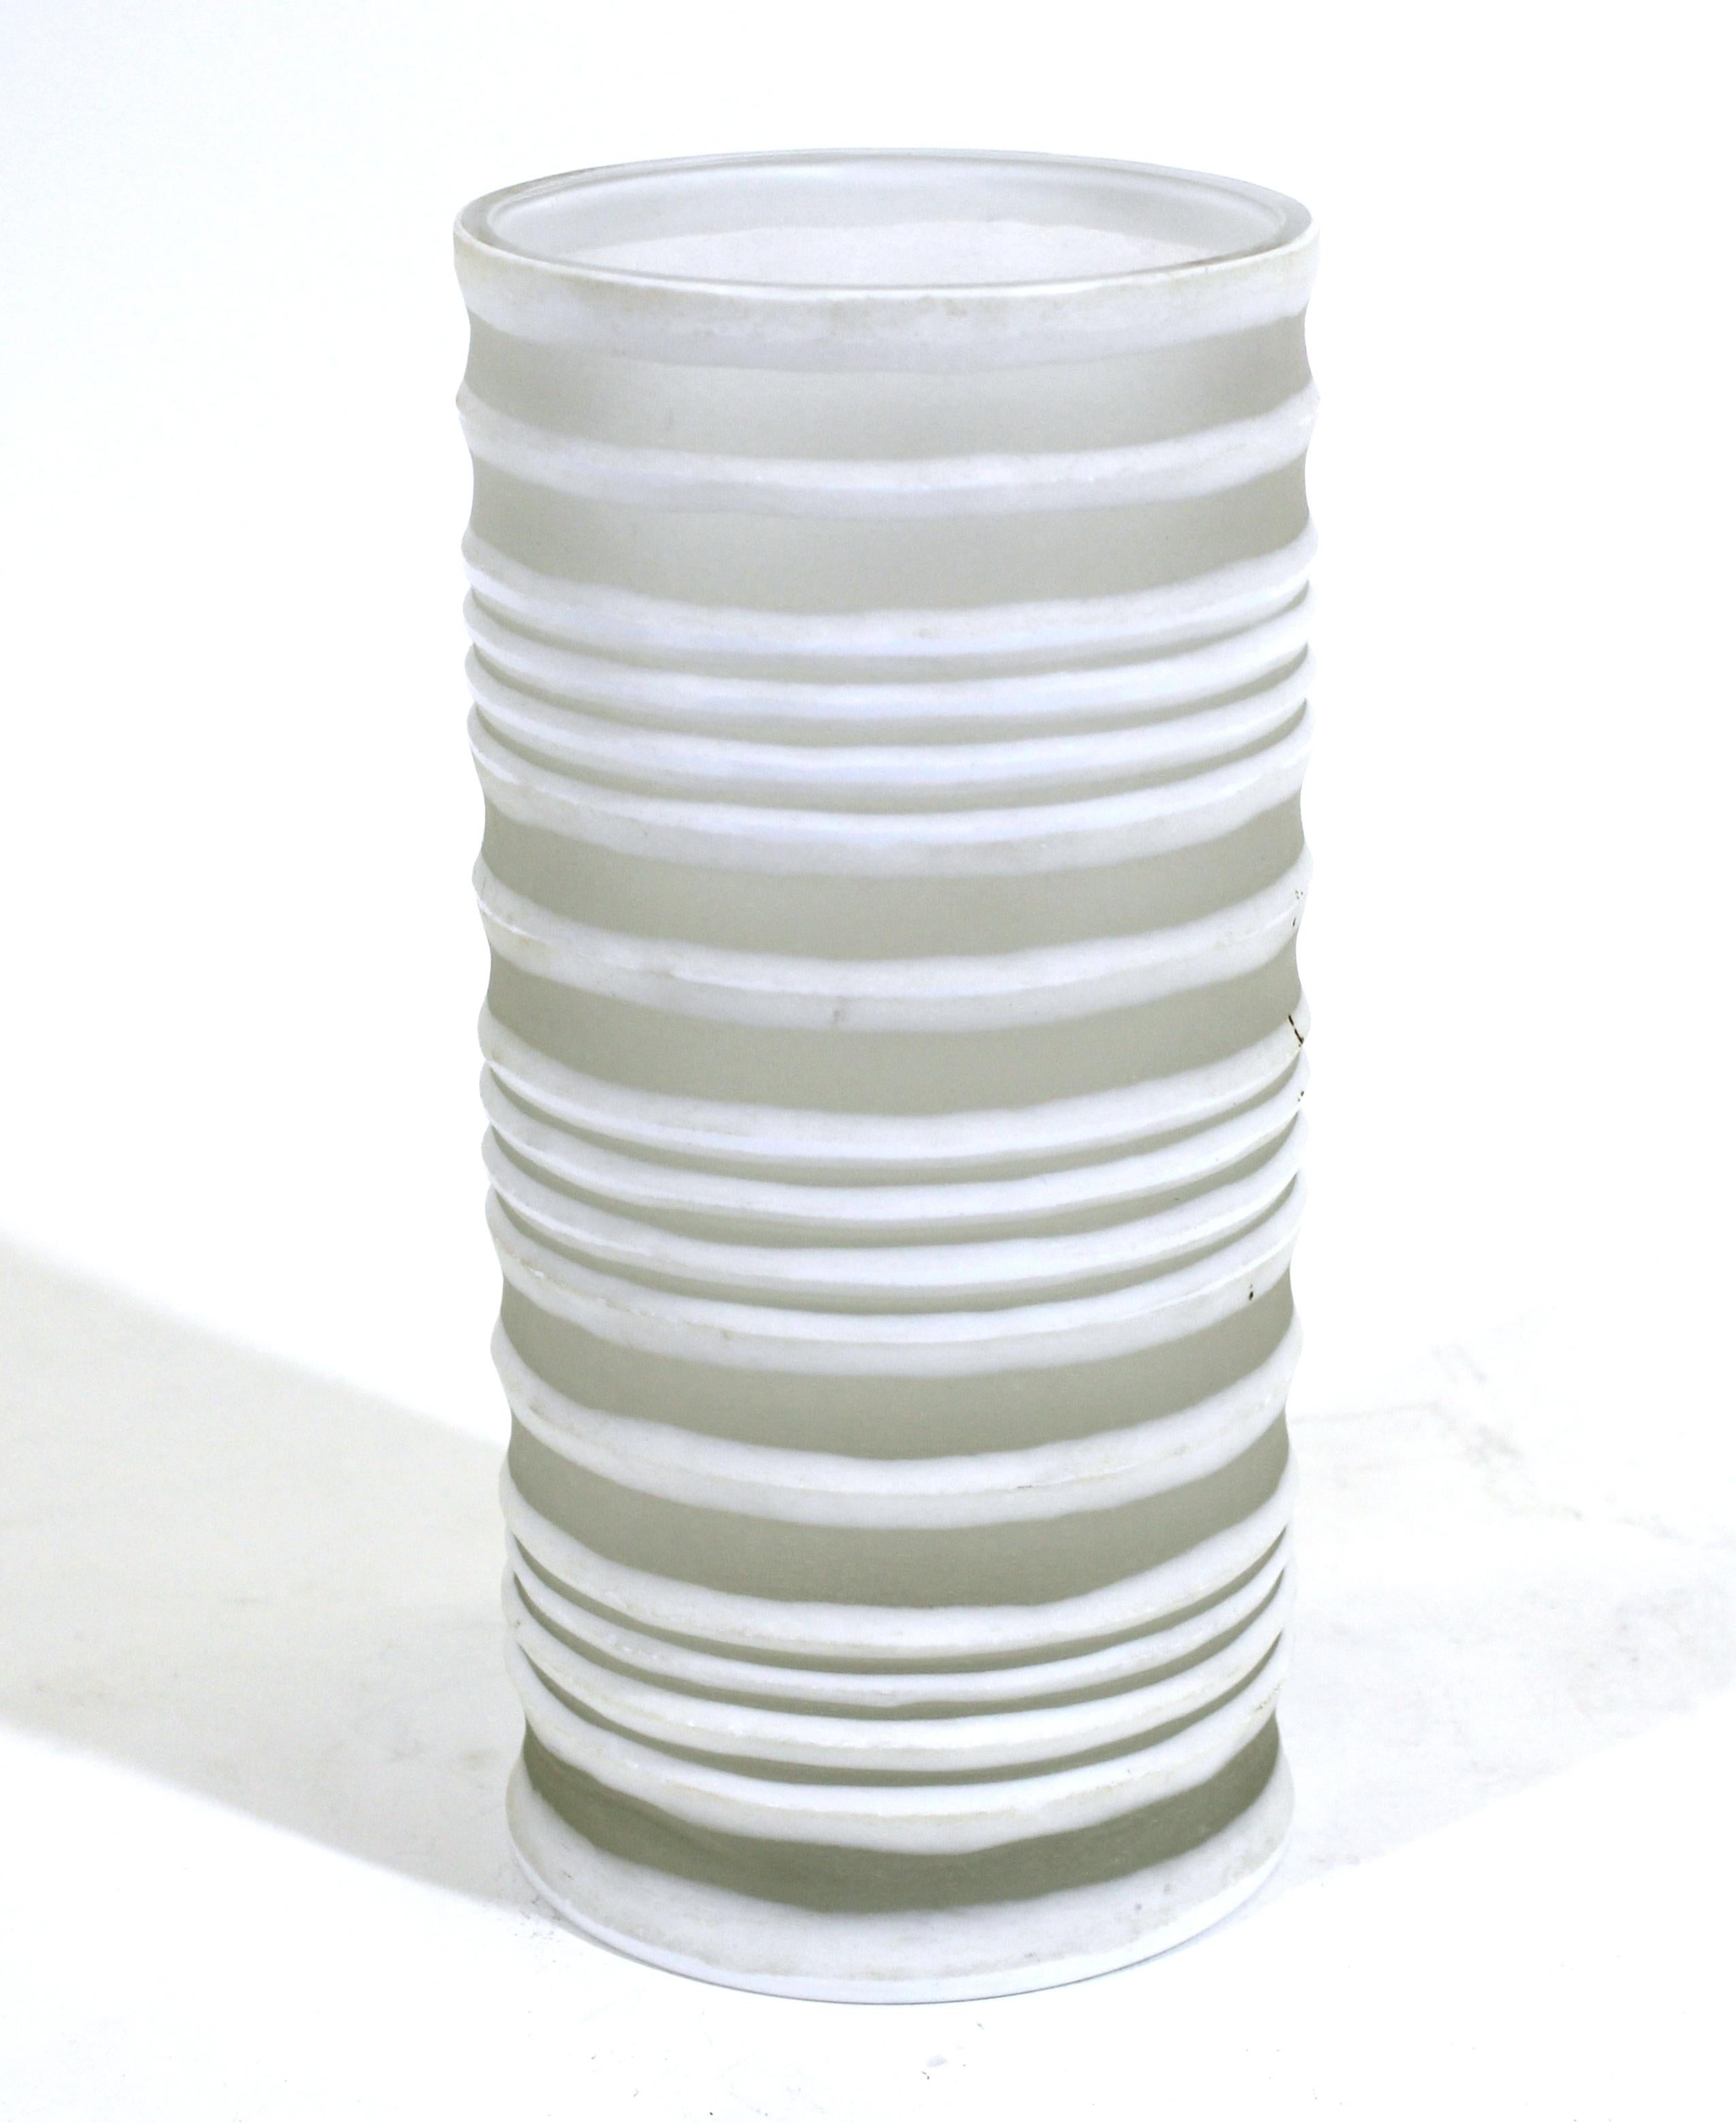 Modern white glass vase in tubular shape with ribbed bands effect.